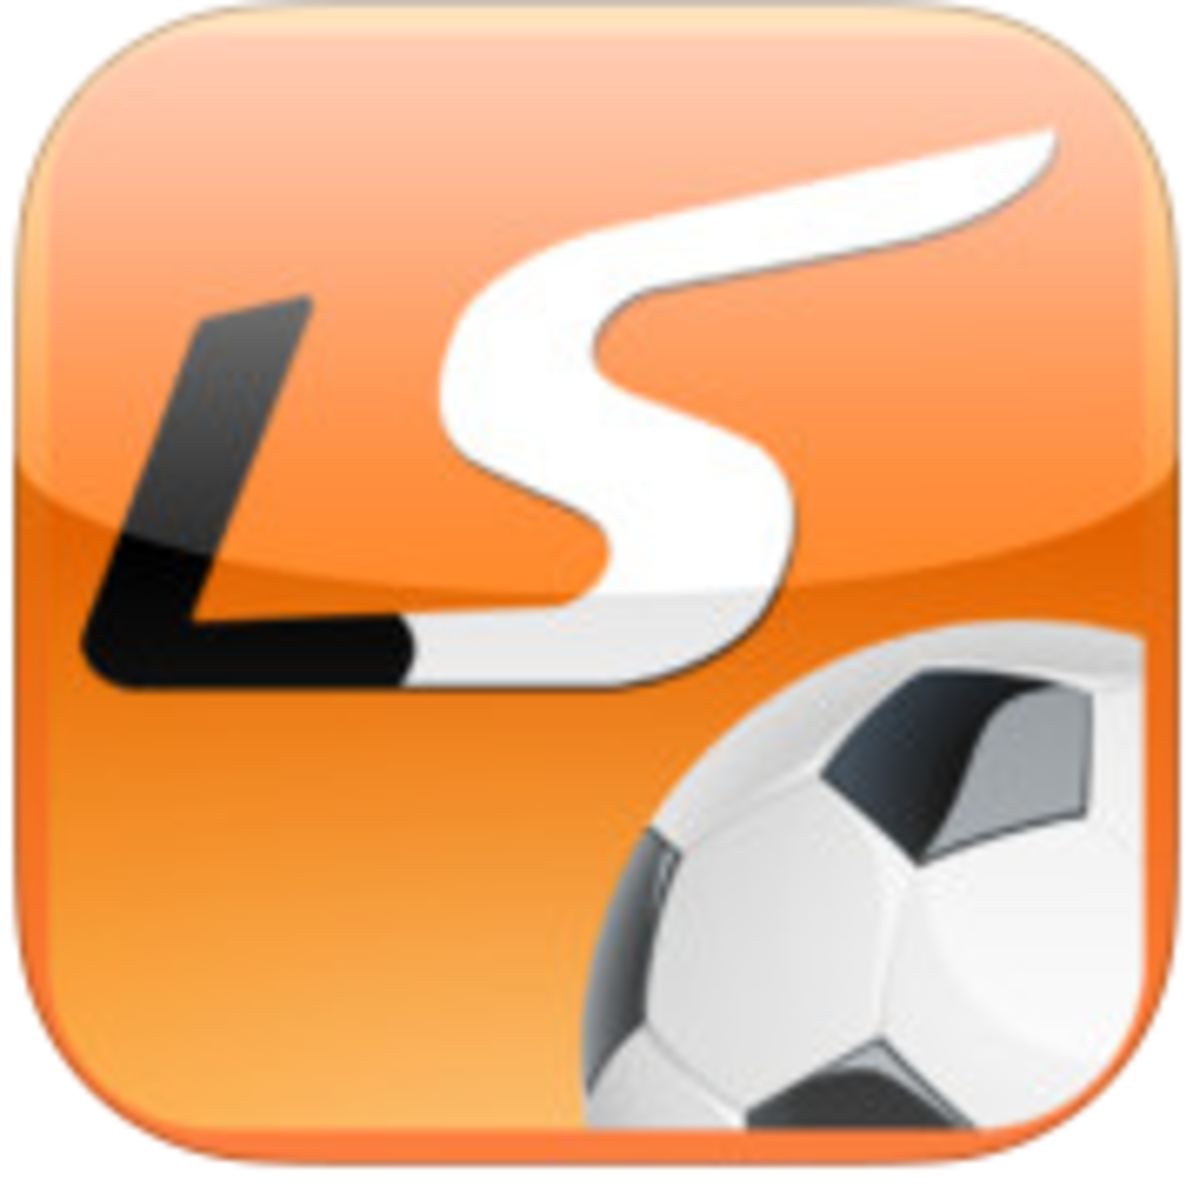 Livescore free soccer app for iPhone